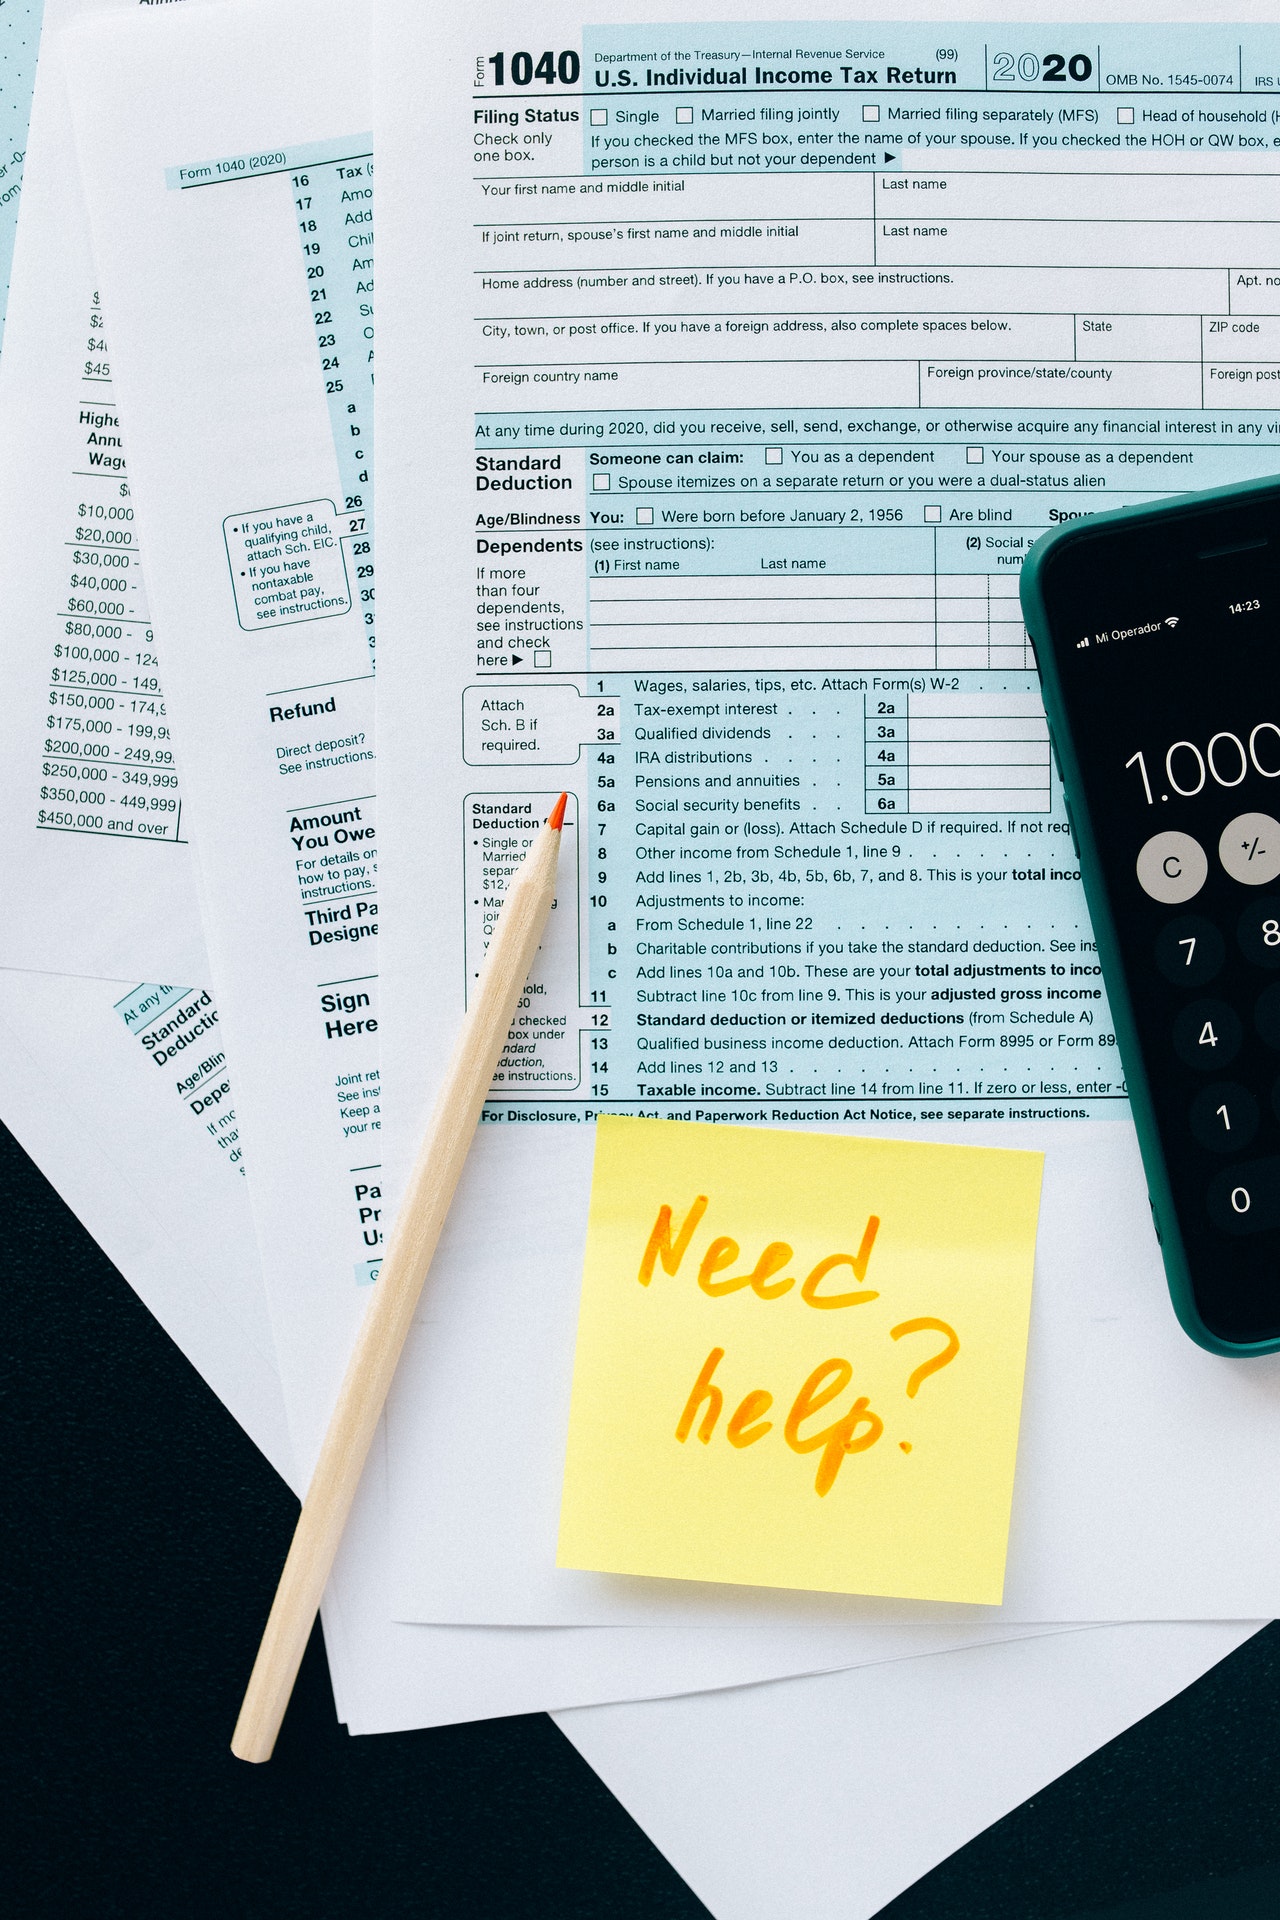 Tax documents, calculator, and pen with yellow post-it reading "Need help?"